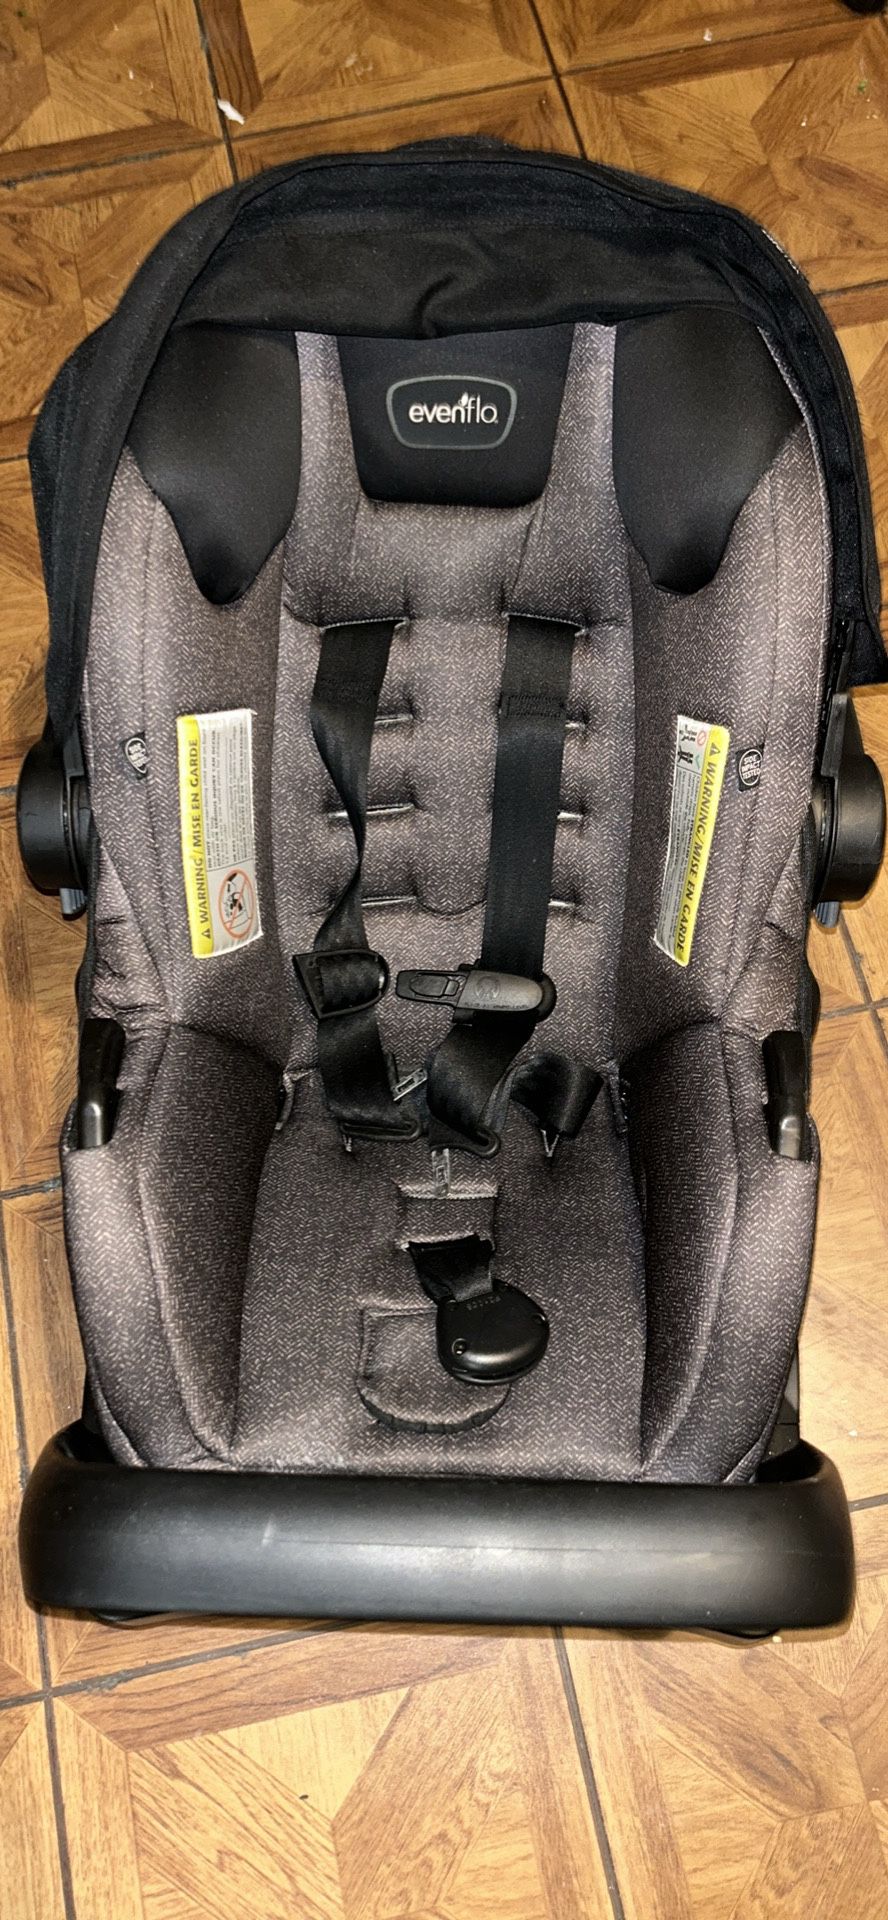 Evenflo Travel System With Infant Car seat W/ 2 Car Based